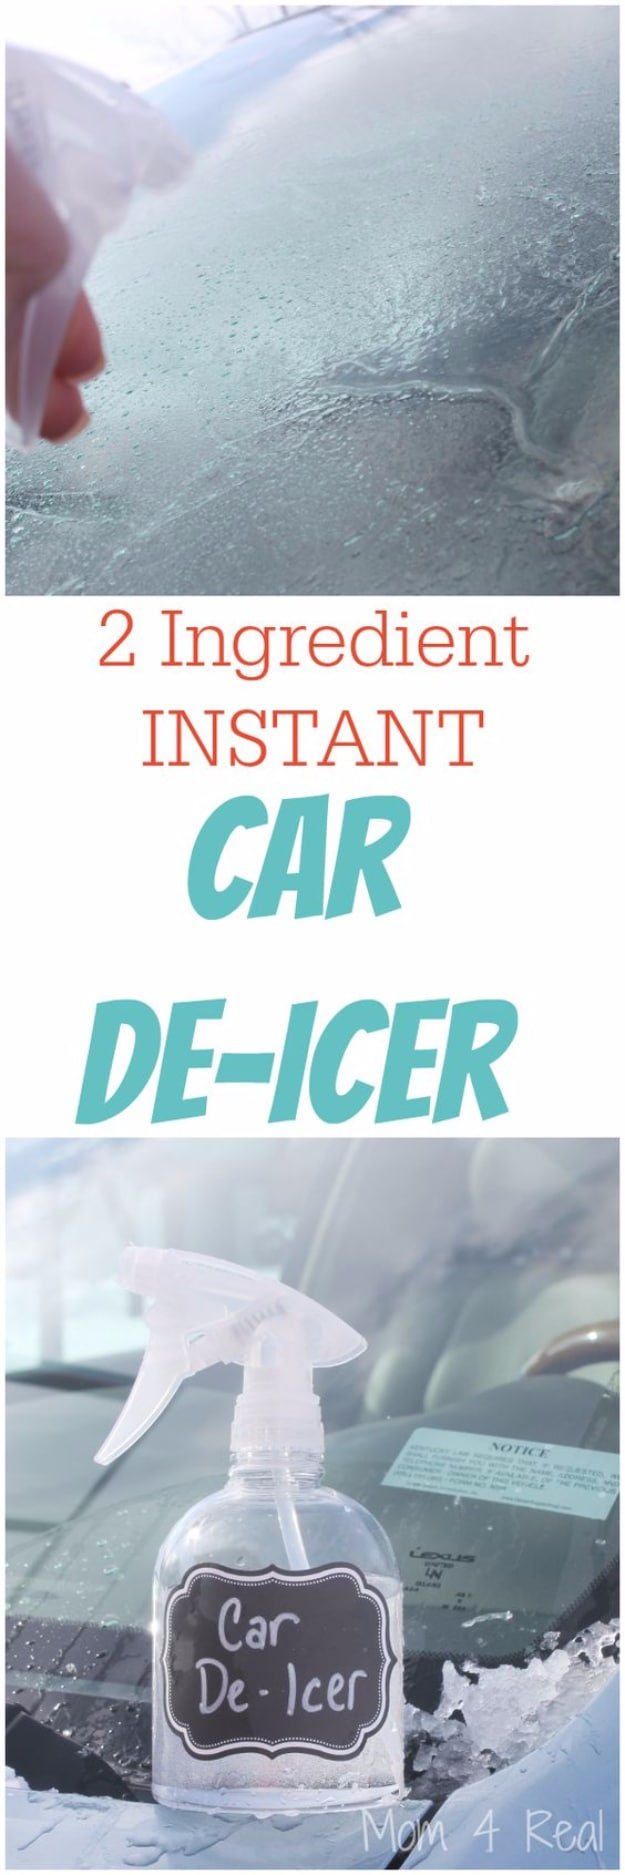 DIY Car Accessories and Ideas for Cars - 2 Ingredient Homemade Car De-Icer Spray - Interior and Exterior, Seats, Mirror, Seat Covers, Storage, Carpet and Window Cleaners and Products - Decor, Keys and Iphone and Tablet Holders - DIY Projects and Crafts for Women and Men 